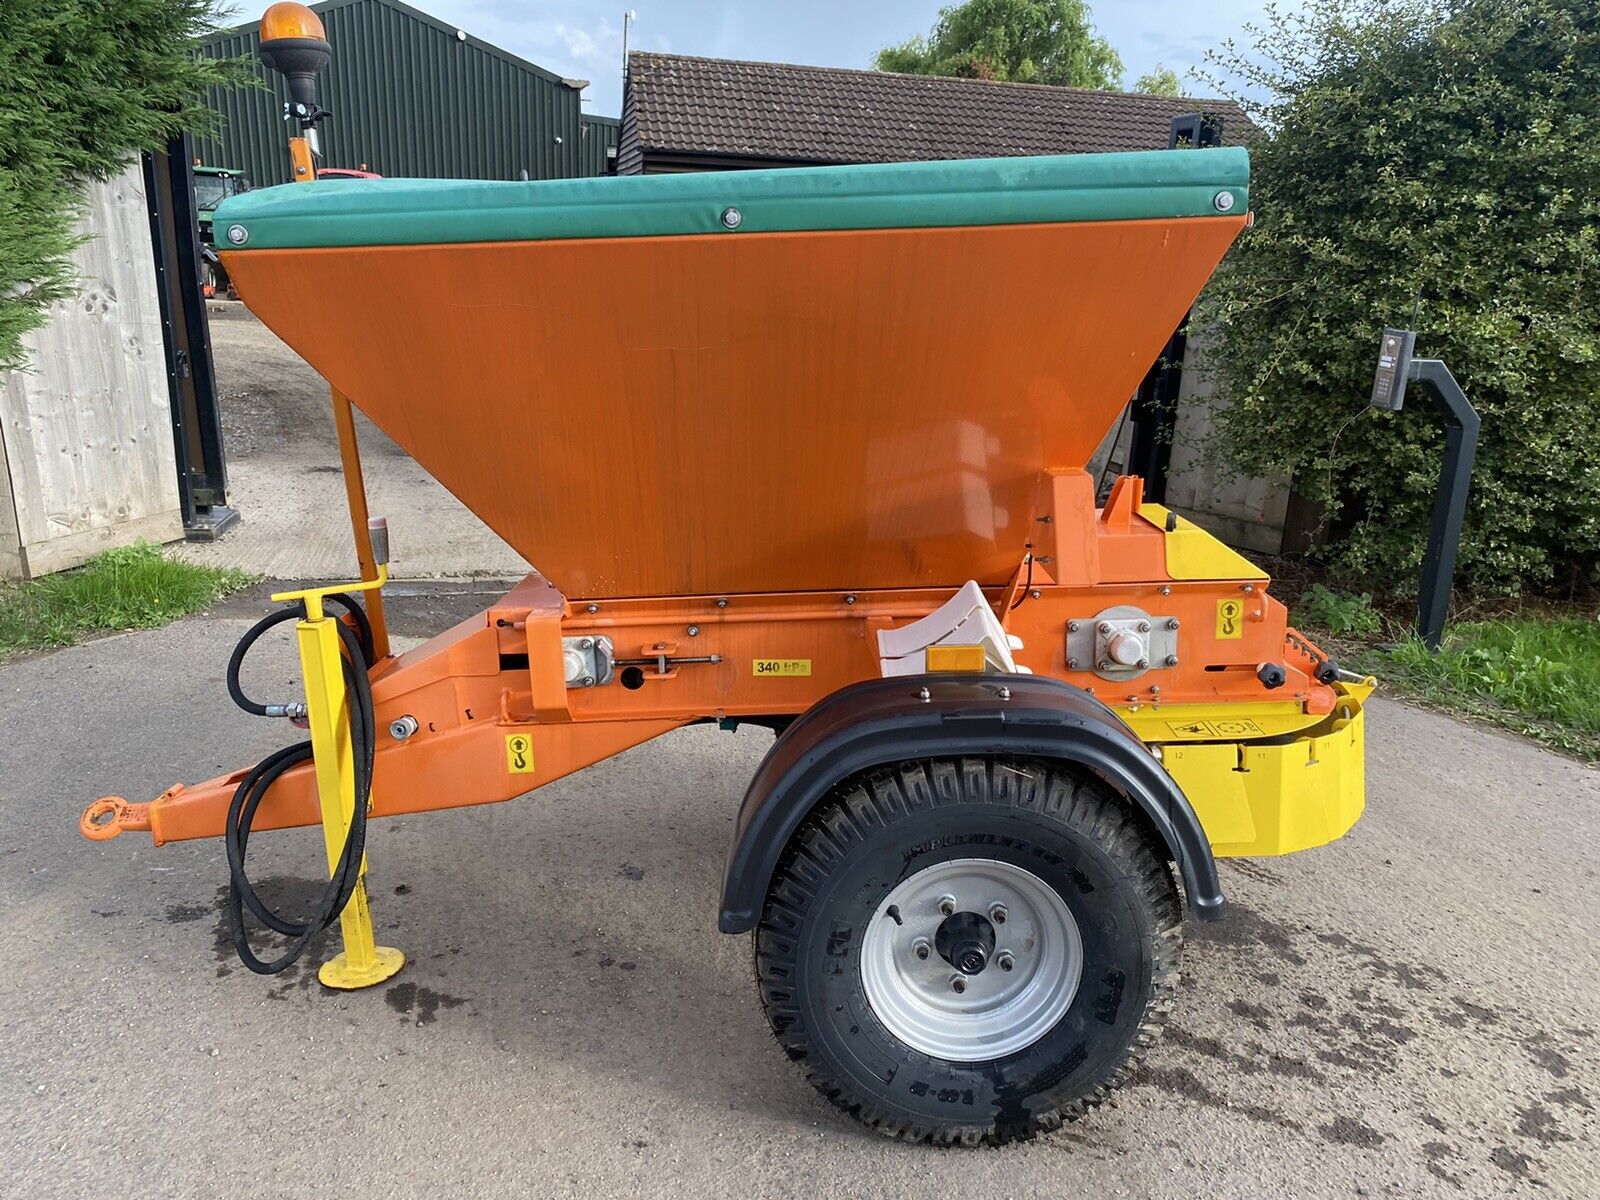 NEW AND UNUSED PRONAR KCT07 TOW ALONG HYDRAULIC GRITTER SALTER SPREADER 1